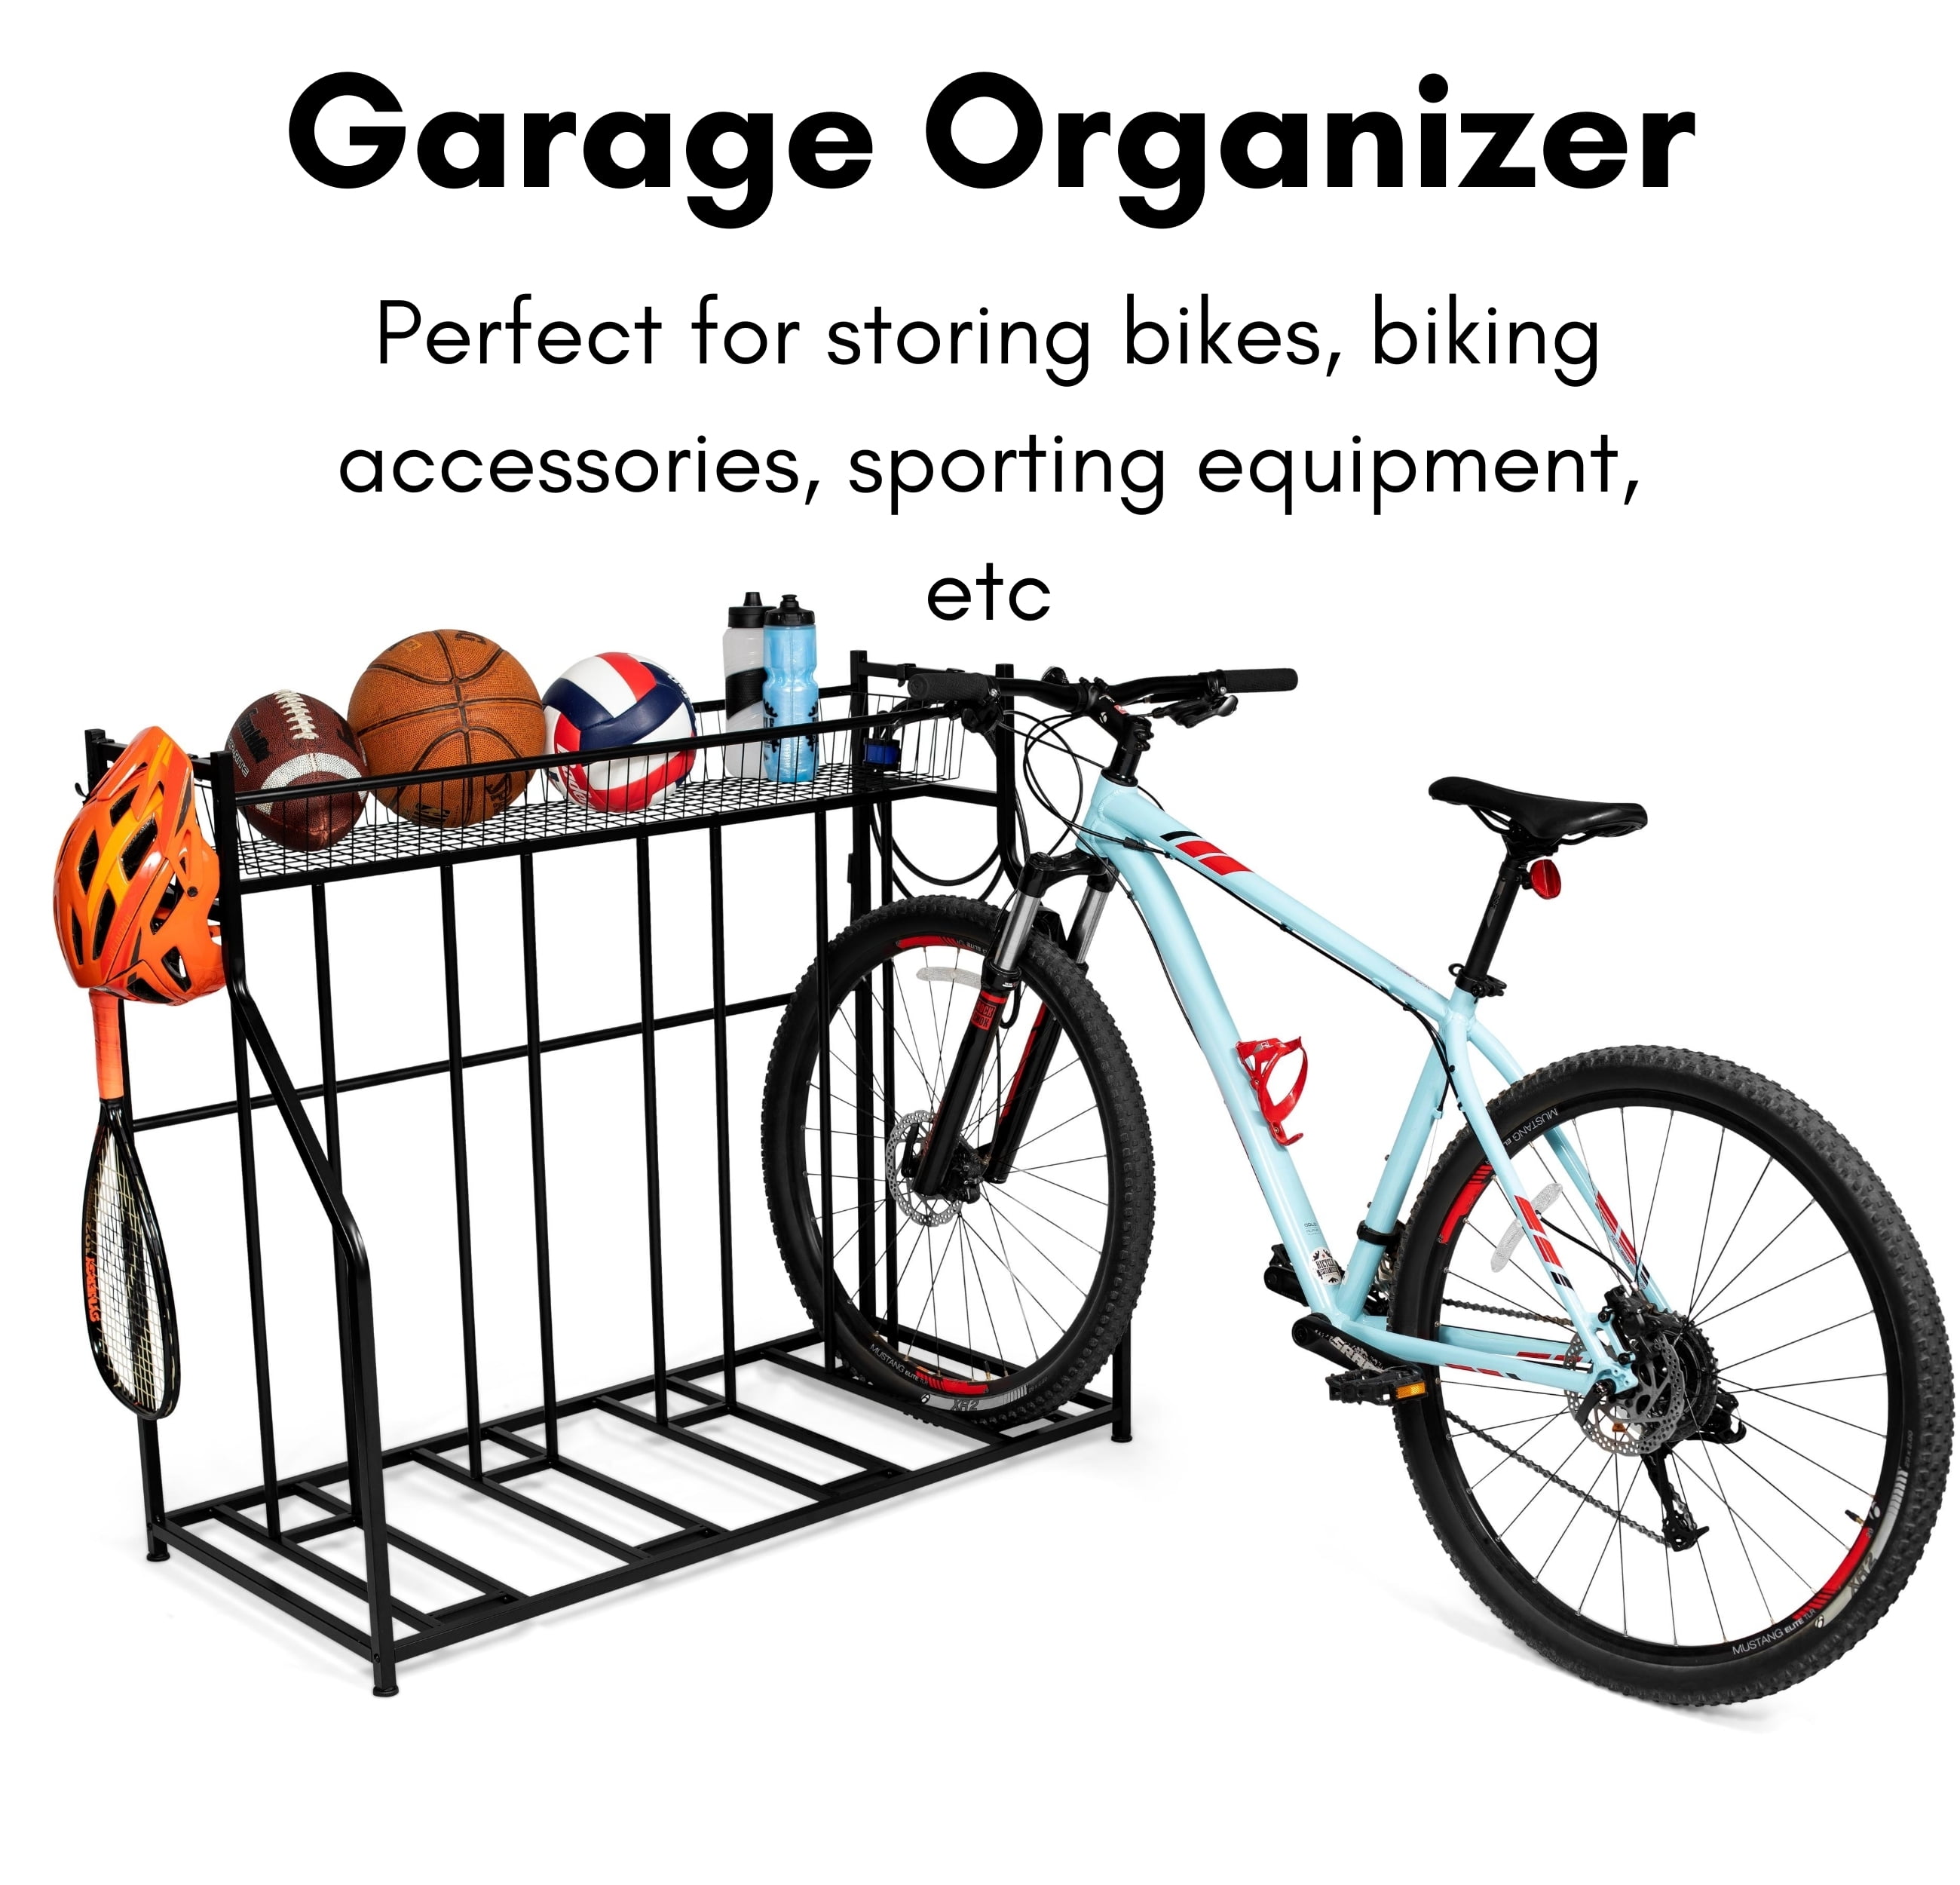 Infinite economy bike rack storage for garage or outdoor use 3 or